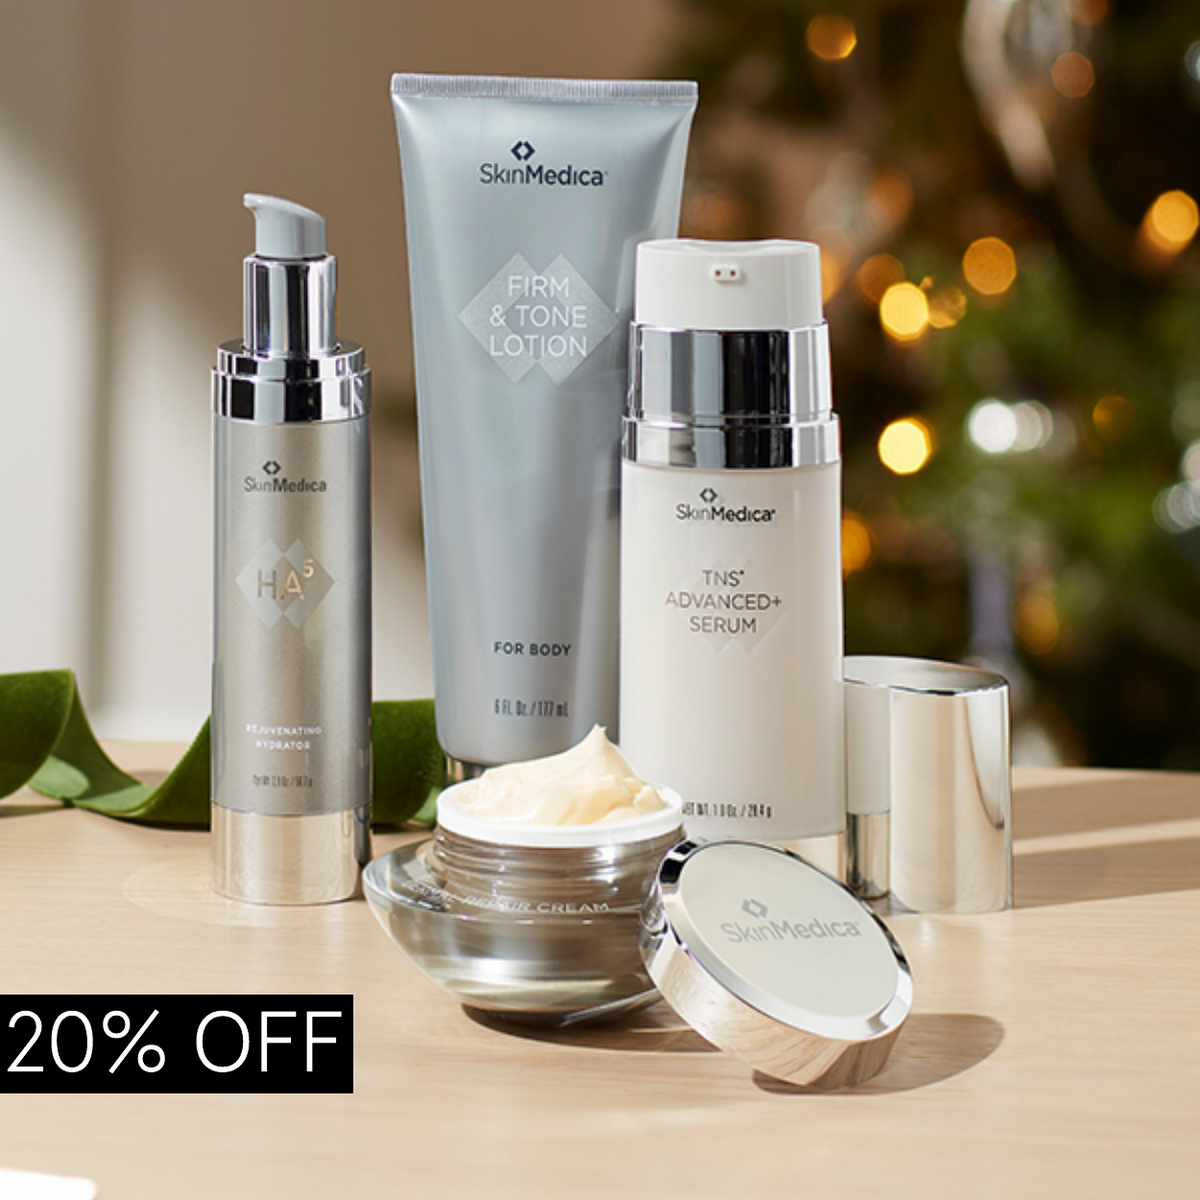 20% off SkinMedica. From cleanser to super-powered serums, save on clinical-strength formulas. SHOP NOW